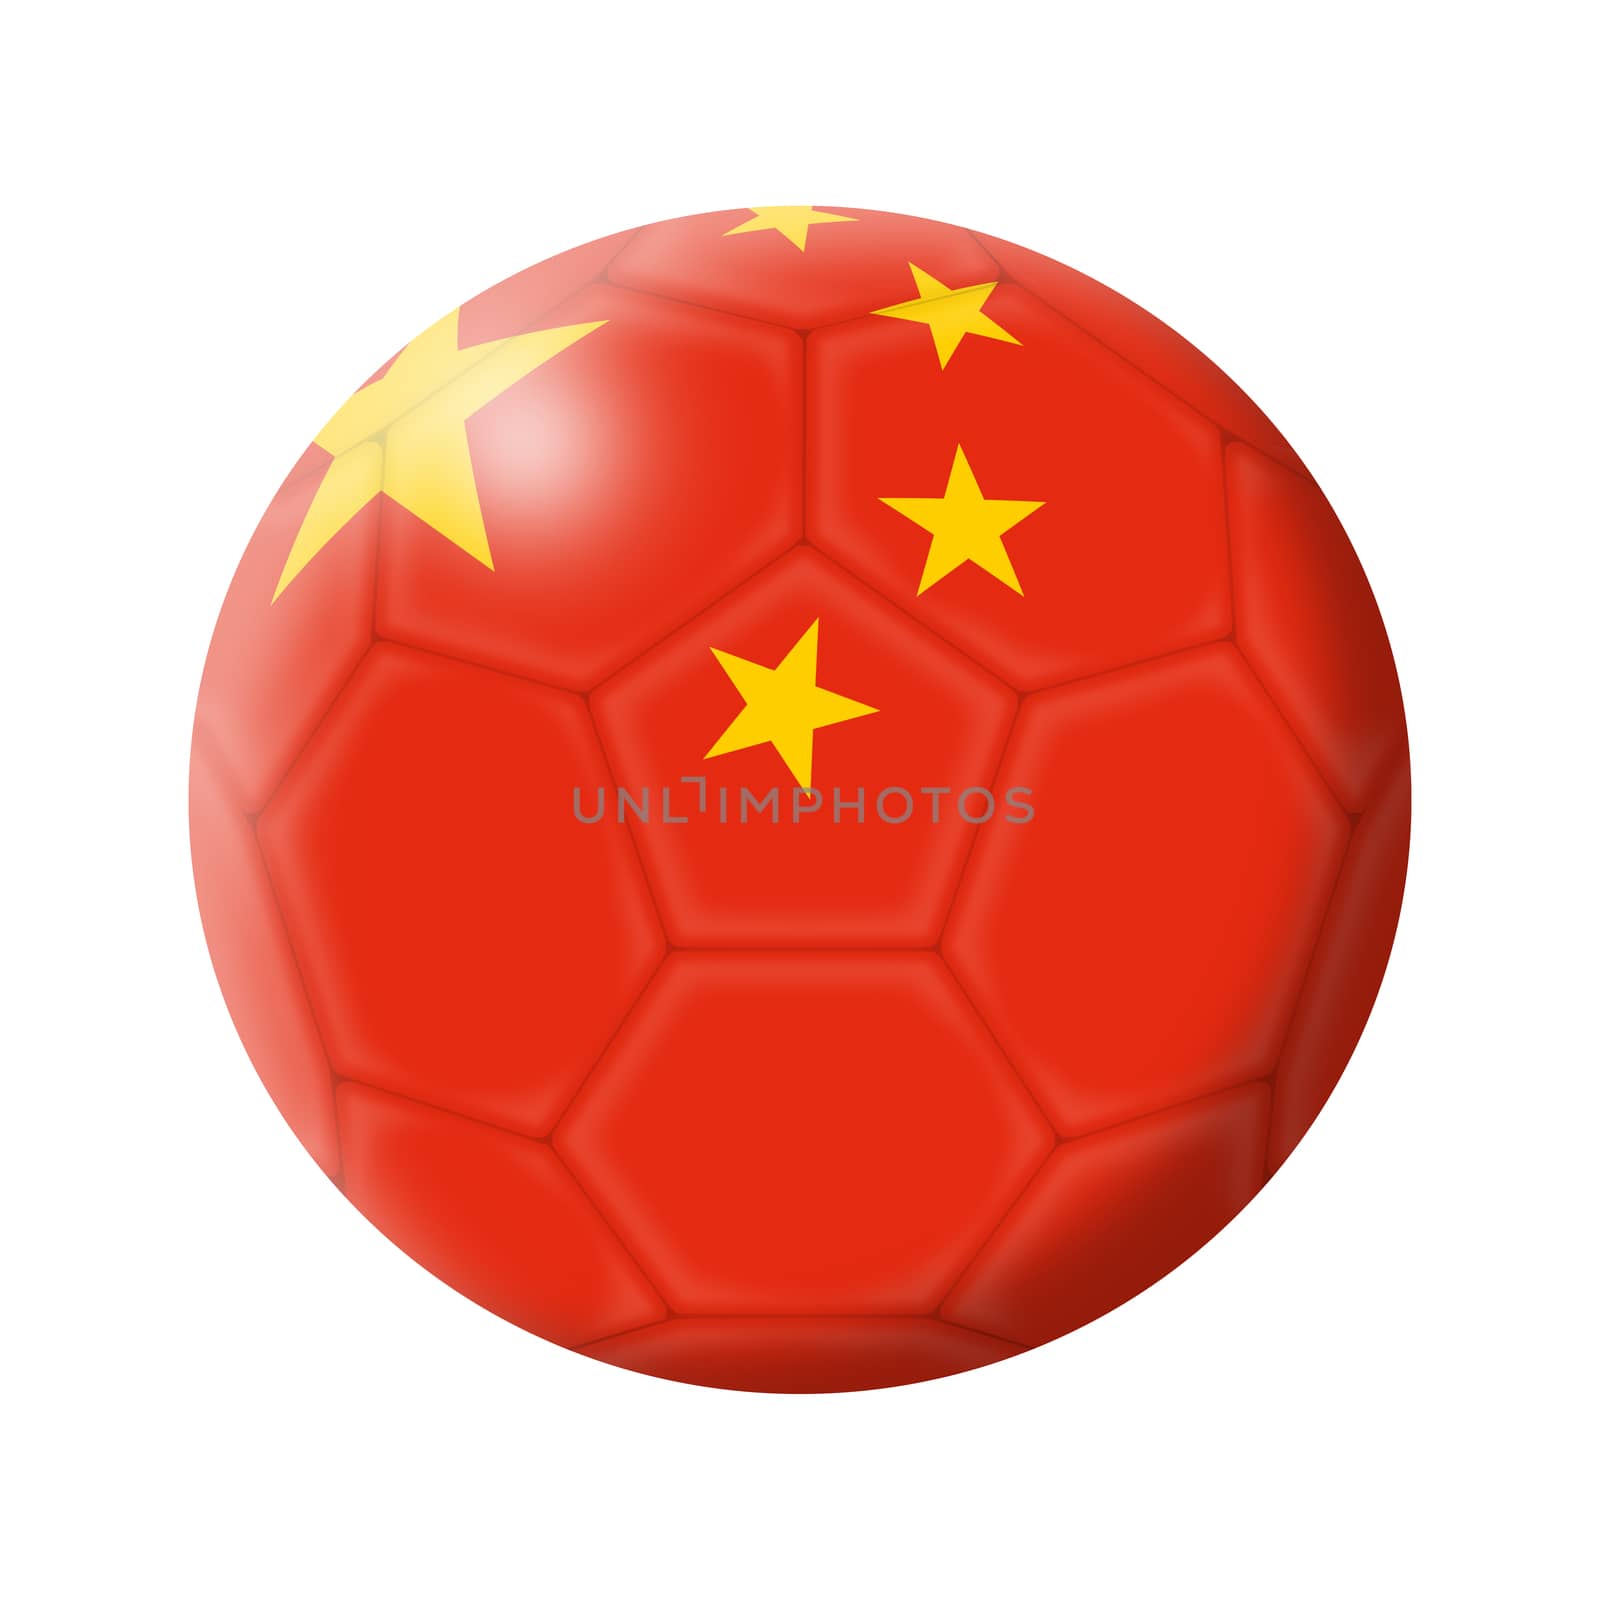 Peoples Republic of China soccer ball football illustration isolated on white with clipping path by VivacityImages